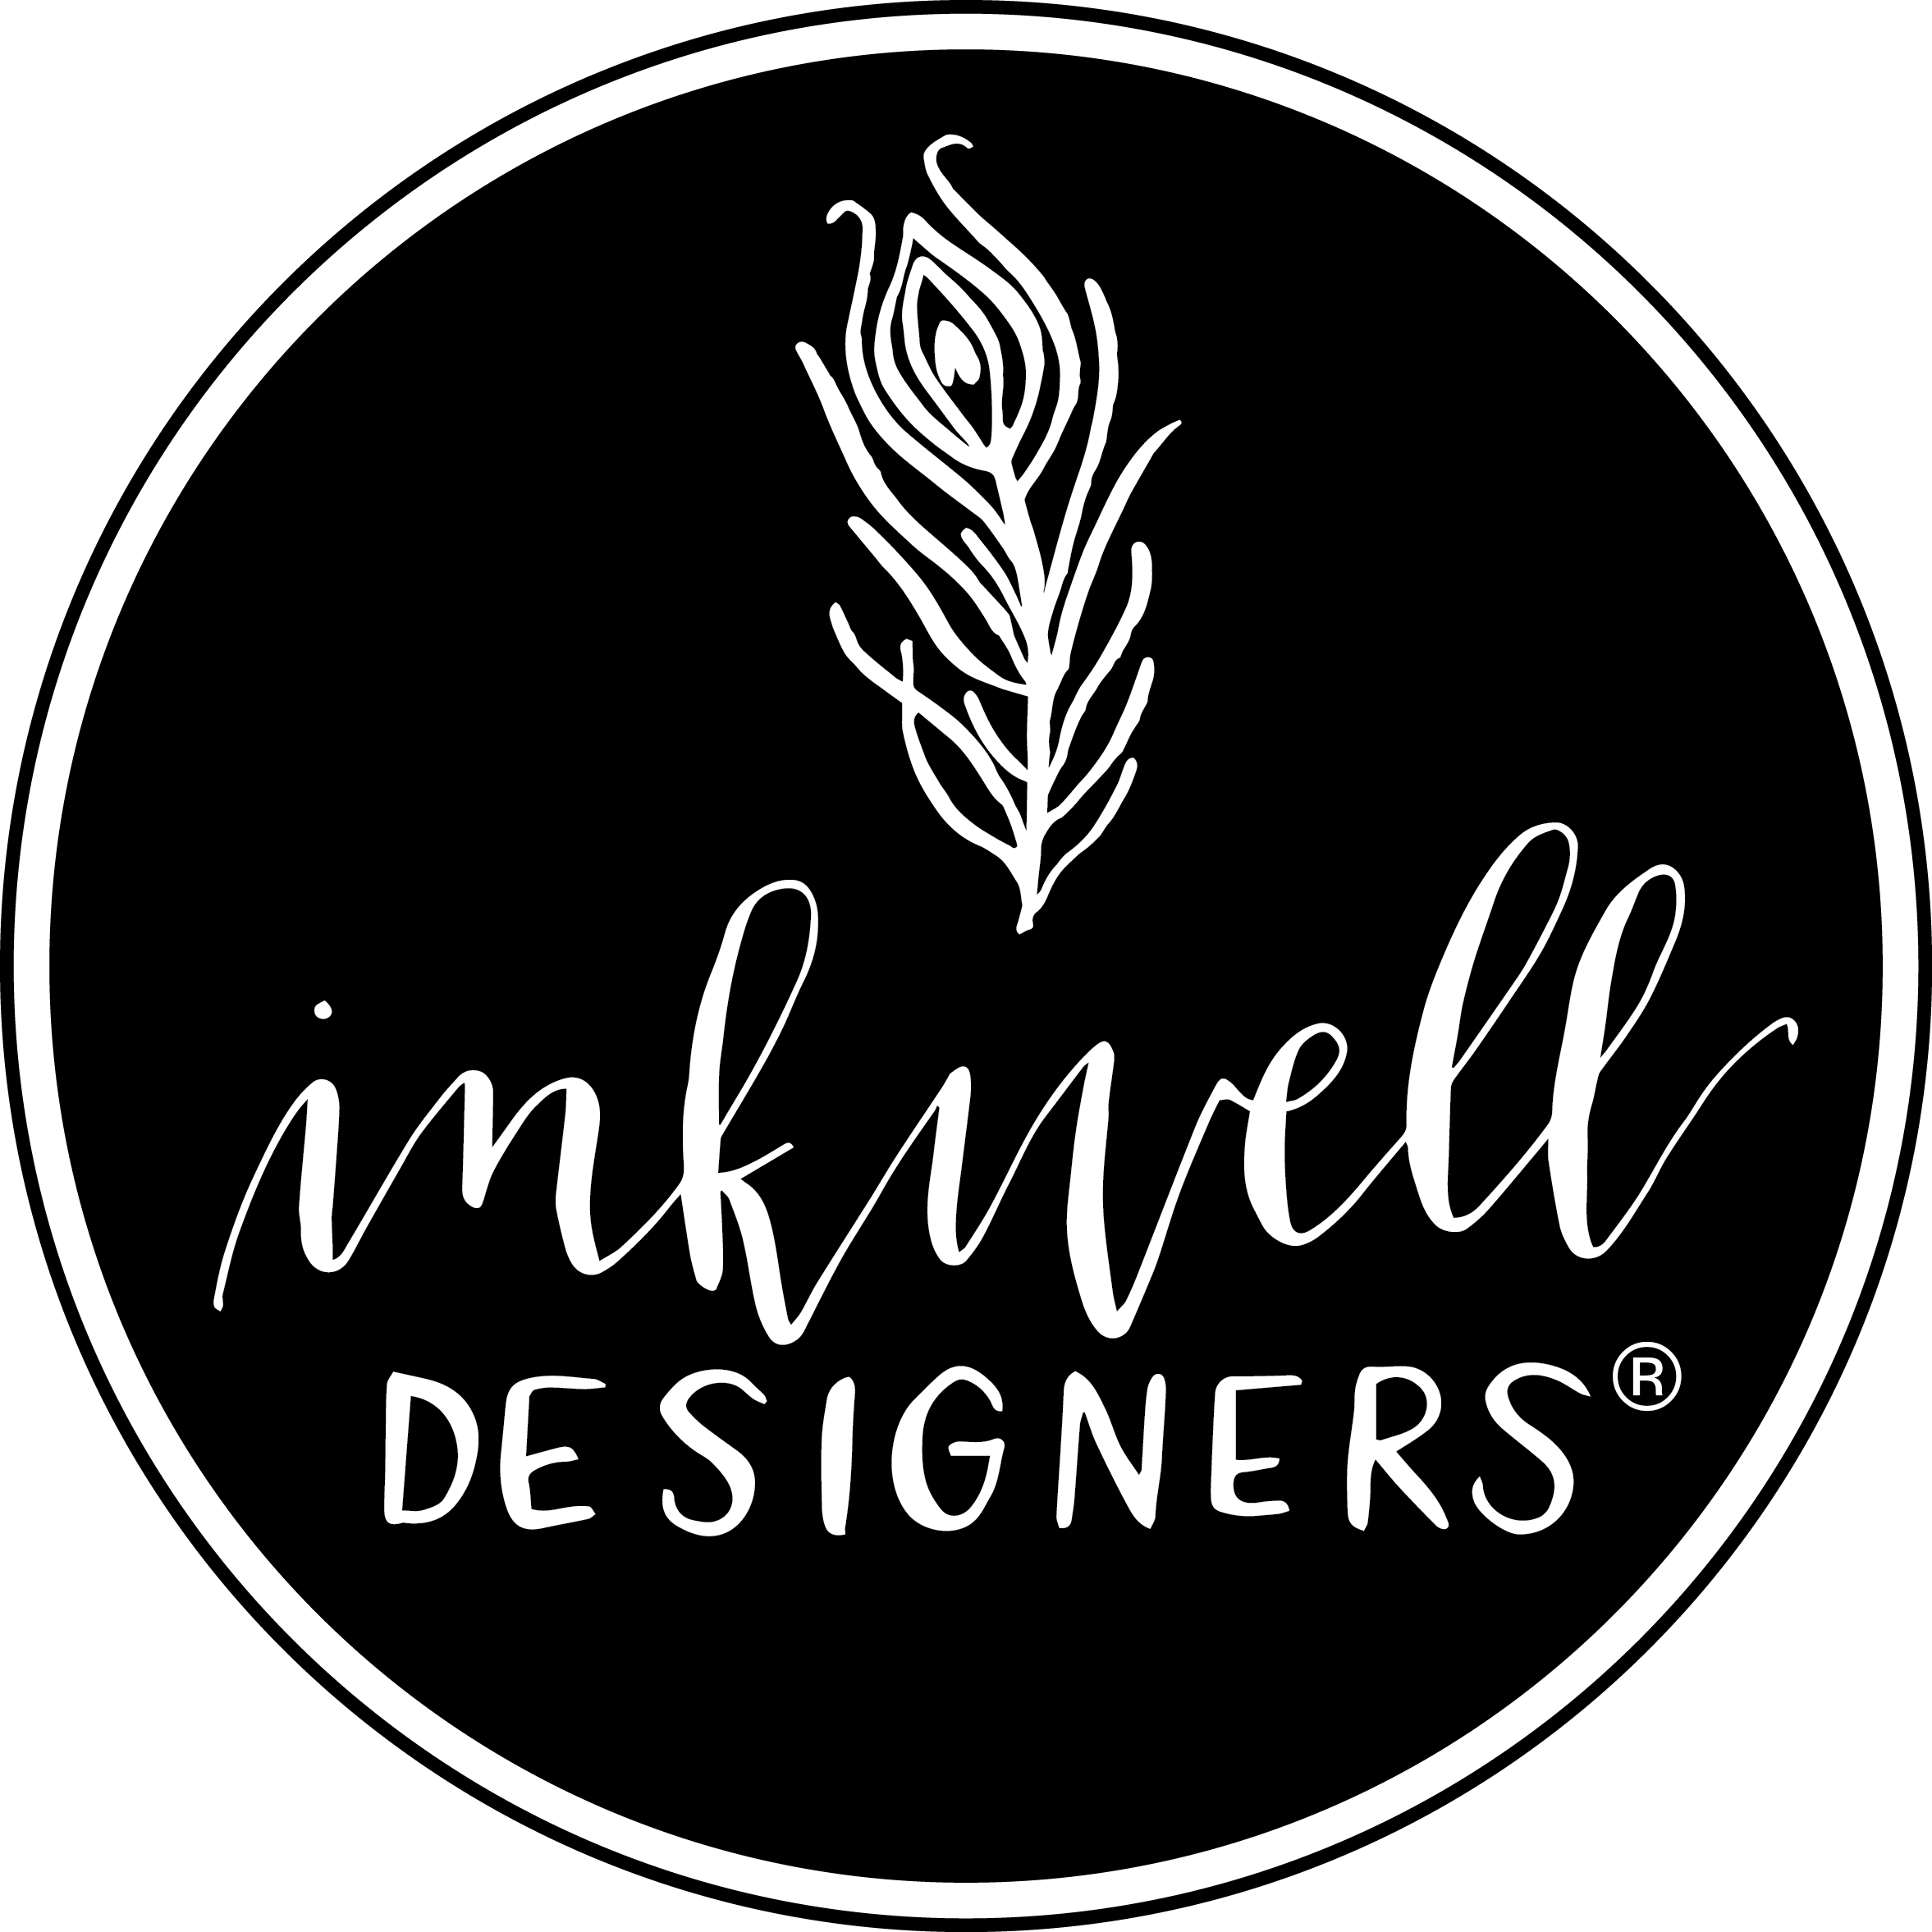 Georgia Engraving, Printing and Promotional Gifts Inkwell Designers